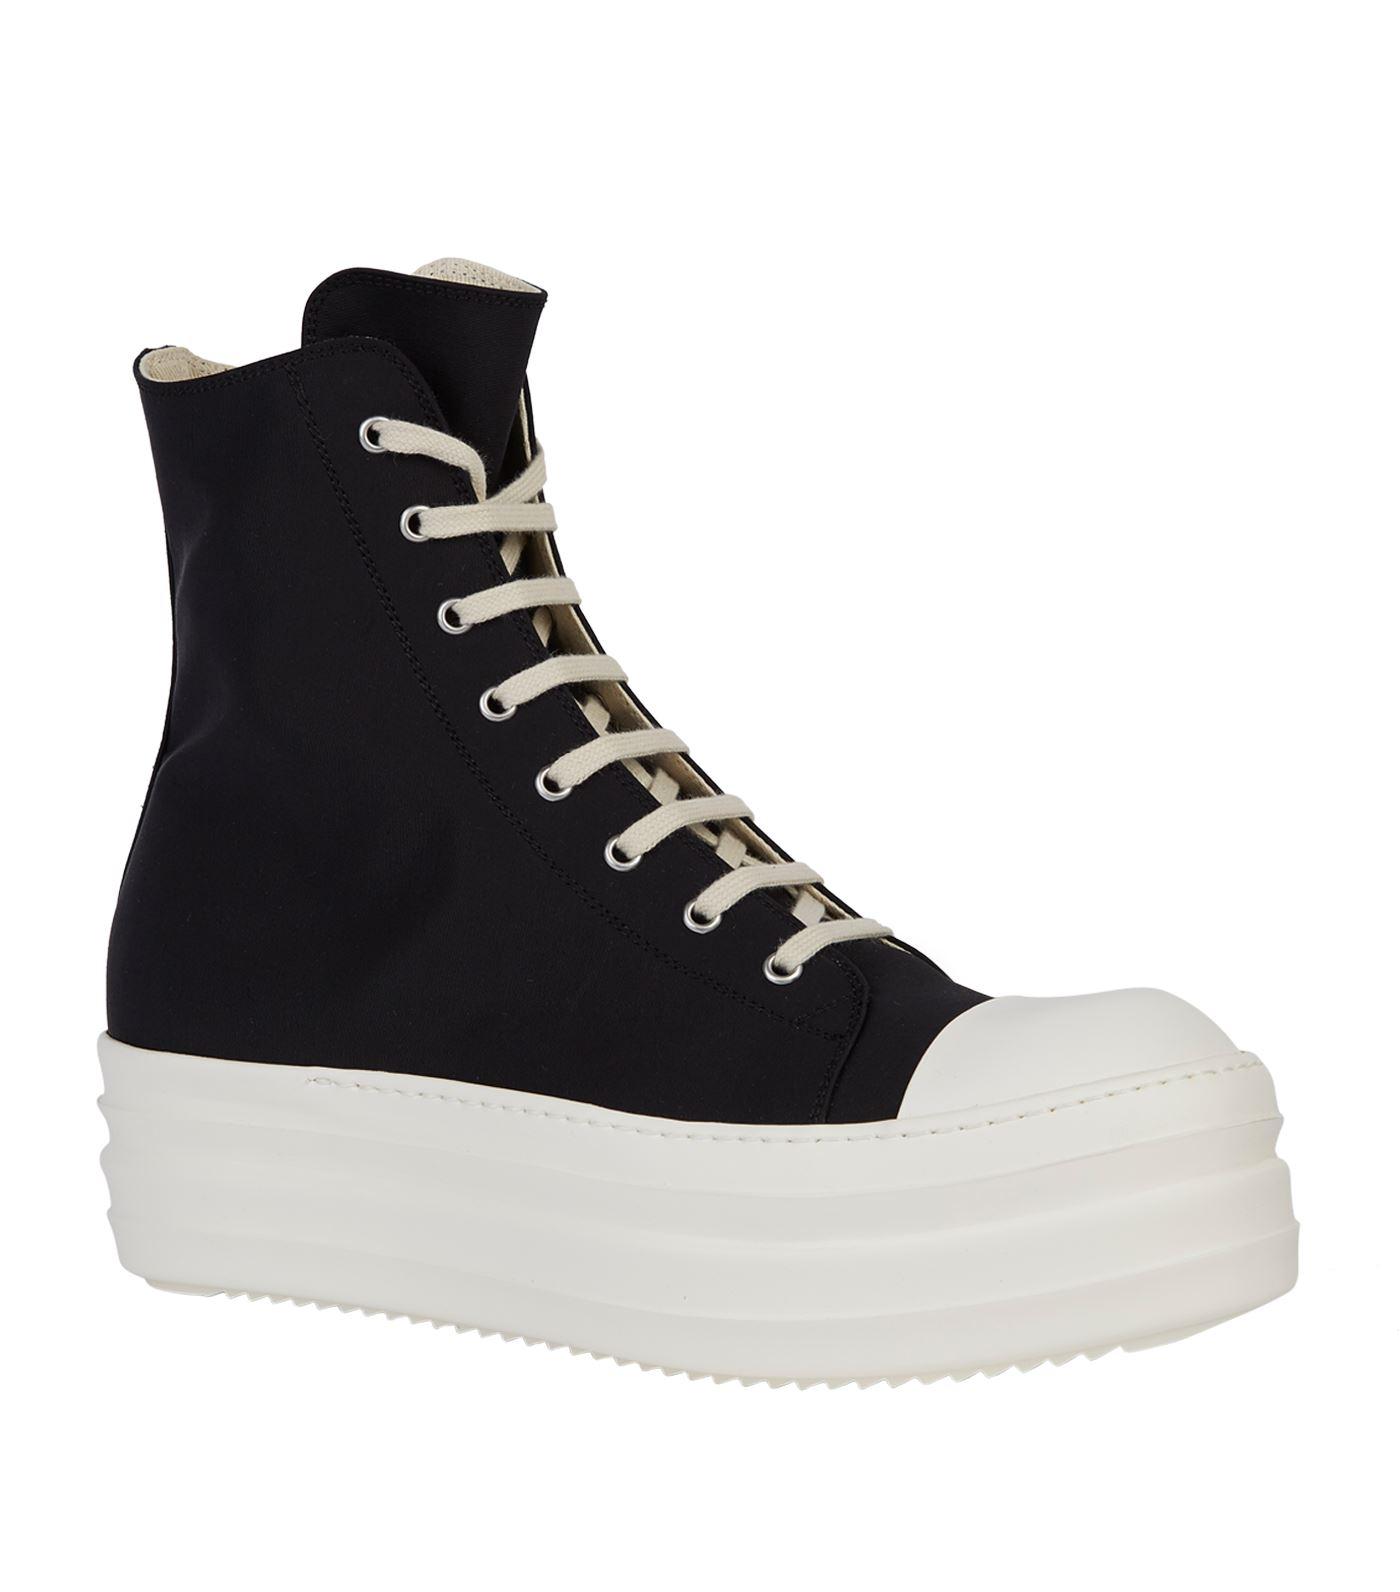 Rick Owens Double Bumper High-top Sneakers in Black for Men - Lyst